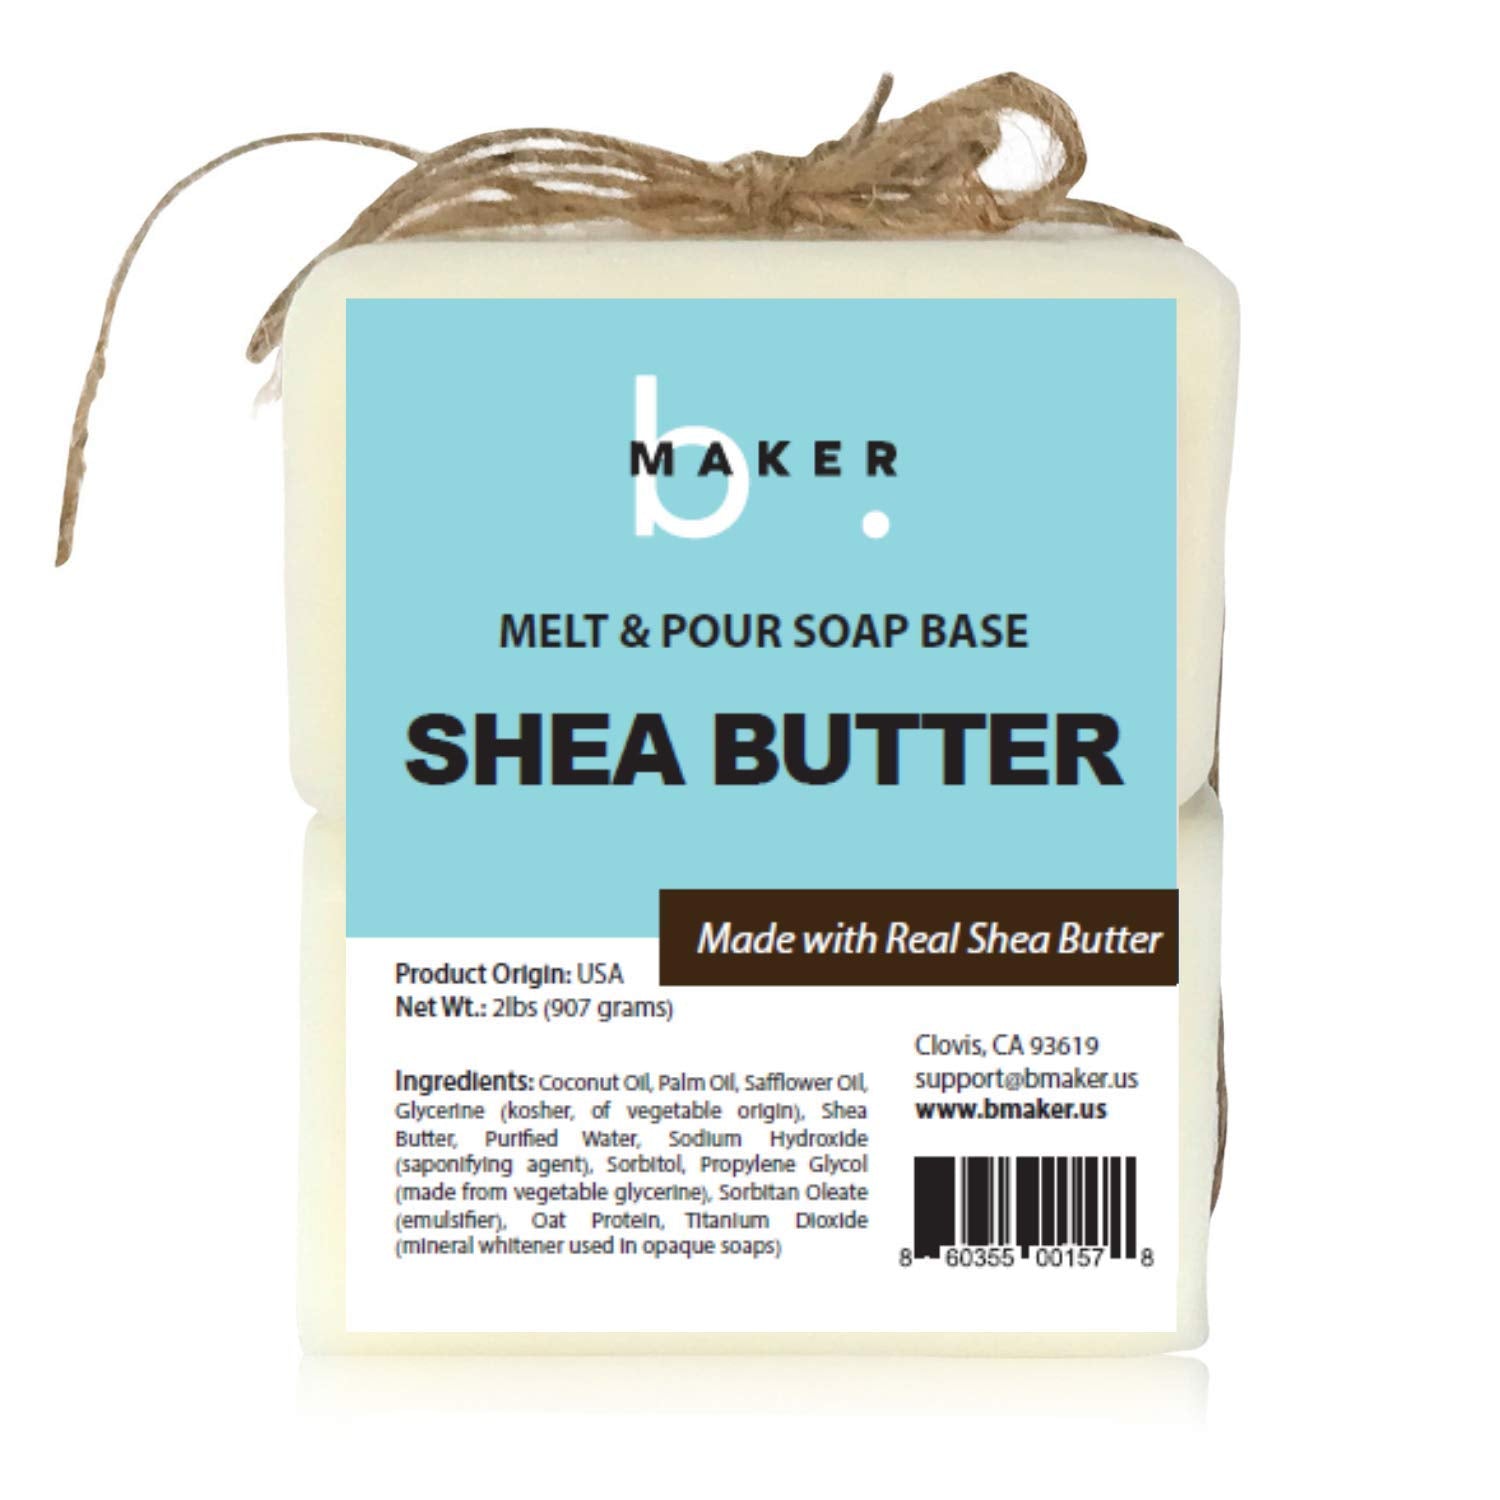 bMAKER All-Natural Shea Butter Melt and Pour Soap Base (2lb Blocks) -  Moisturizing and Nourishing M&P Base Soap Making Supplies - Suitable for